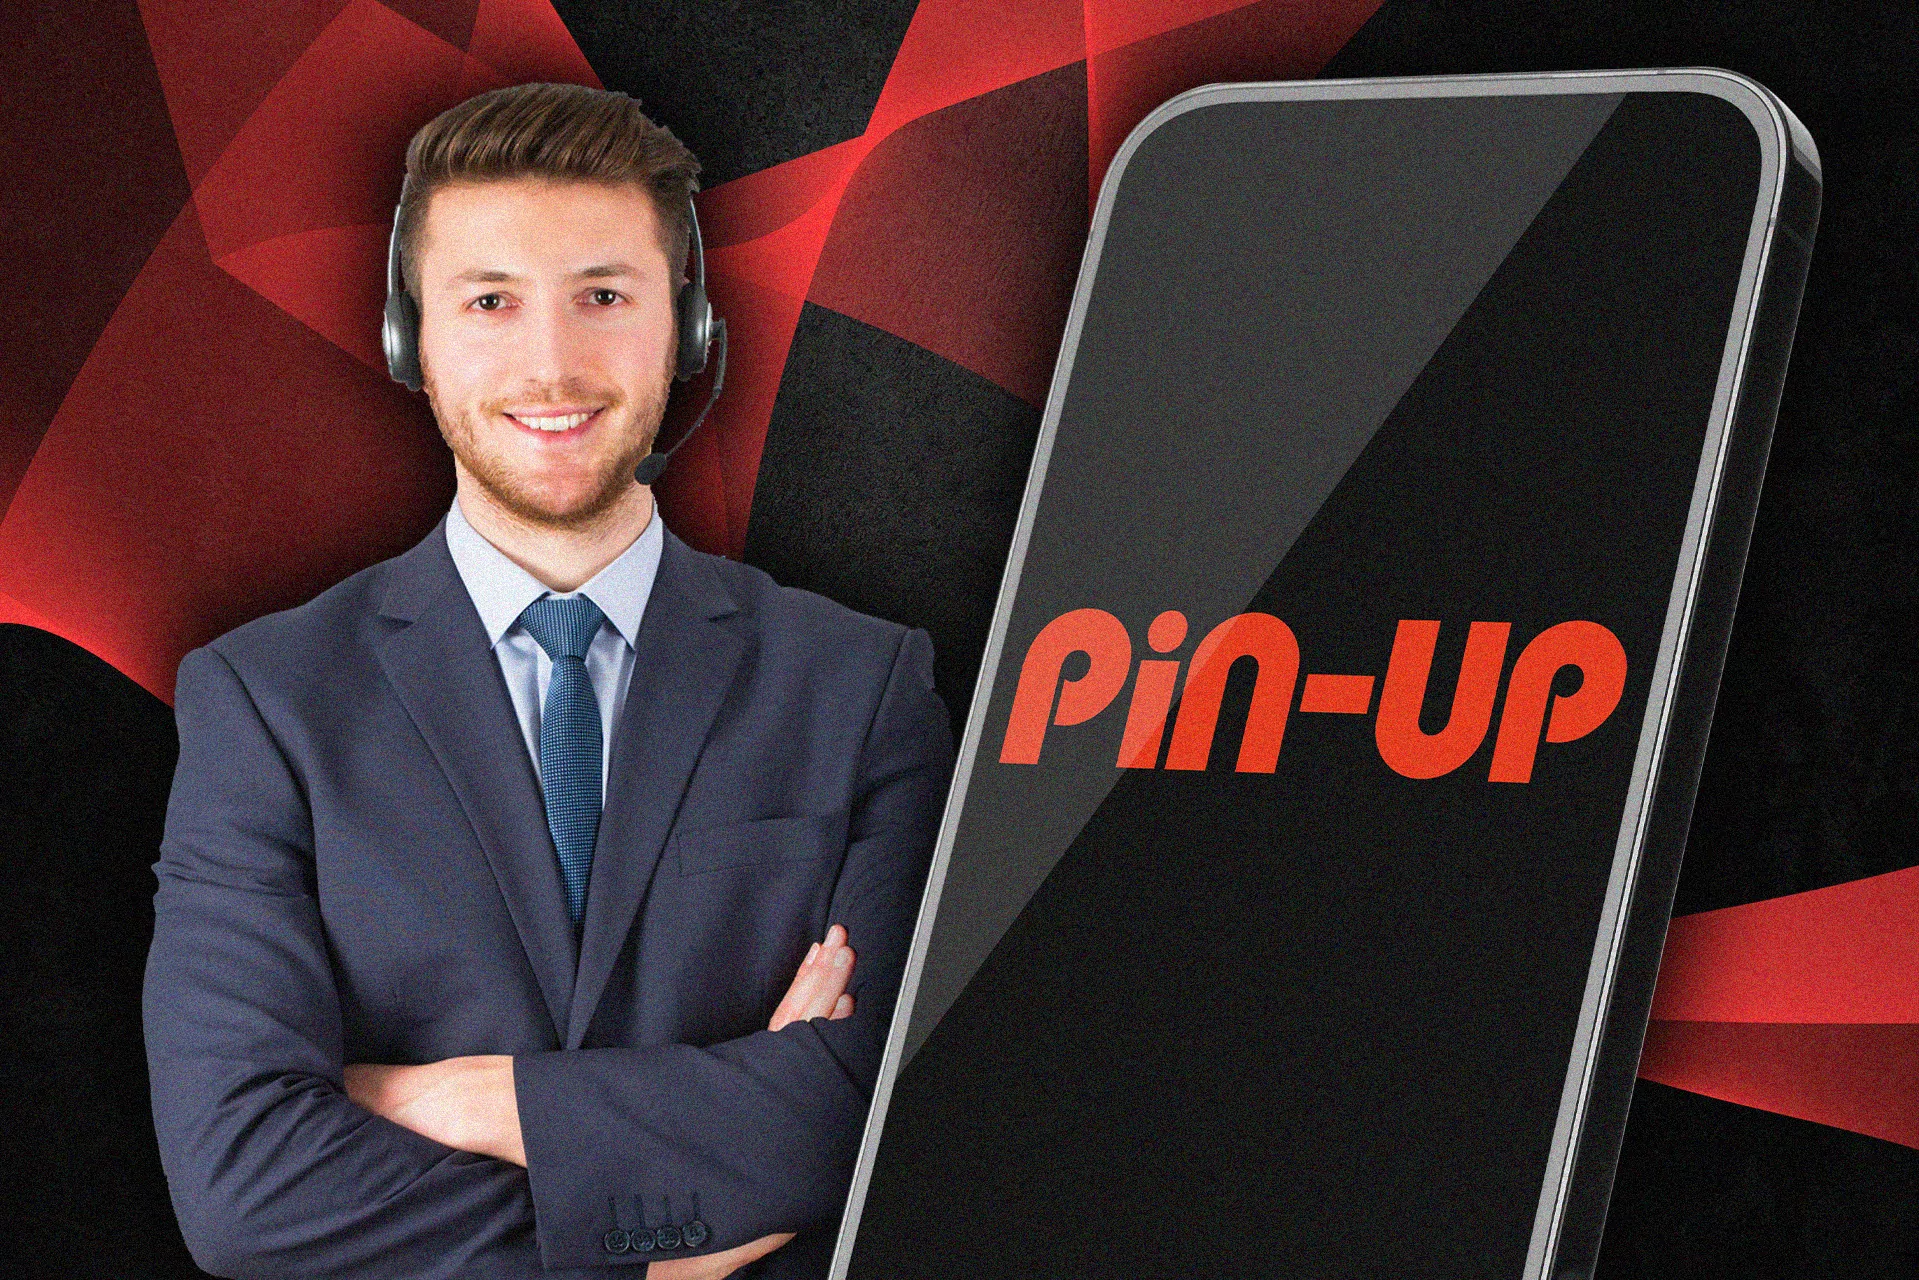 Contact the support team right in your Pin-Up app.